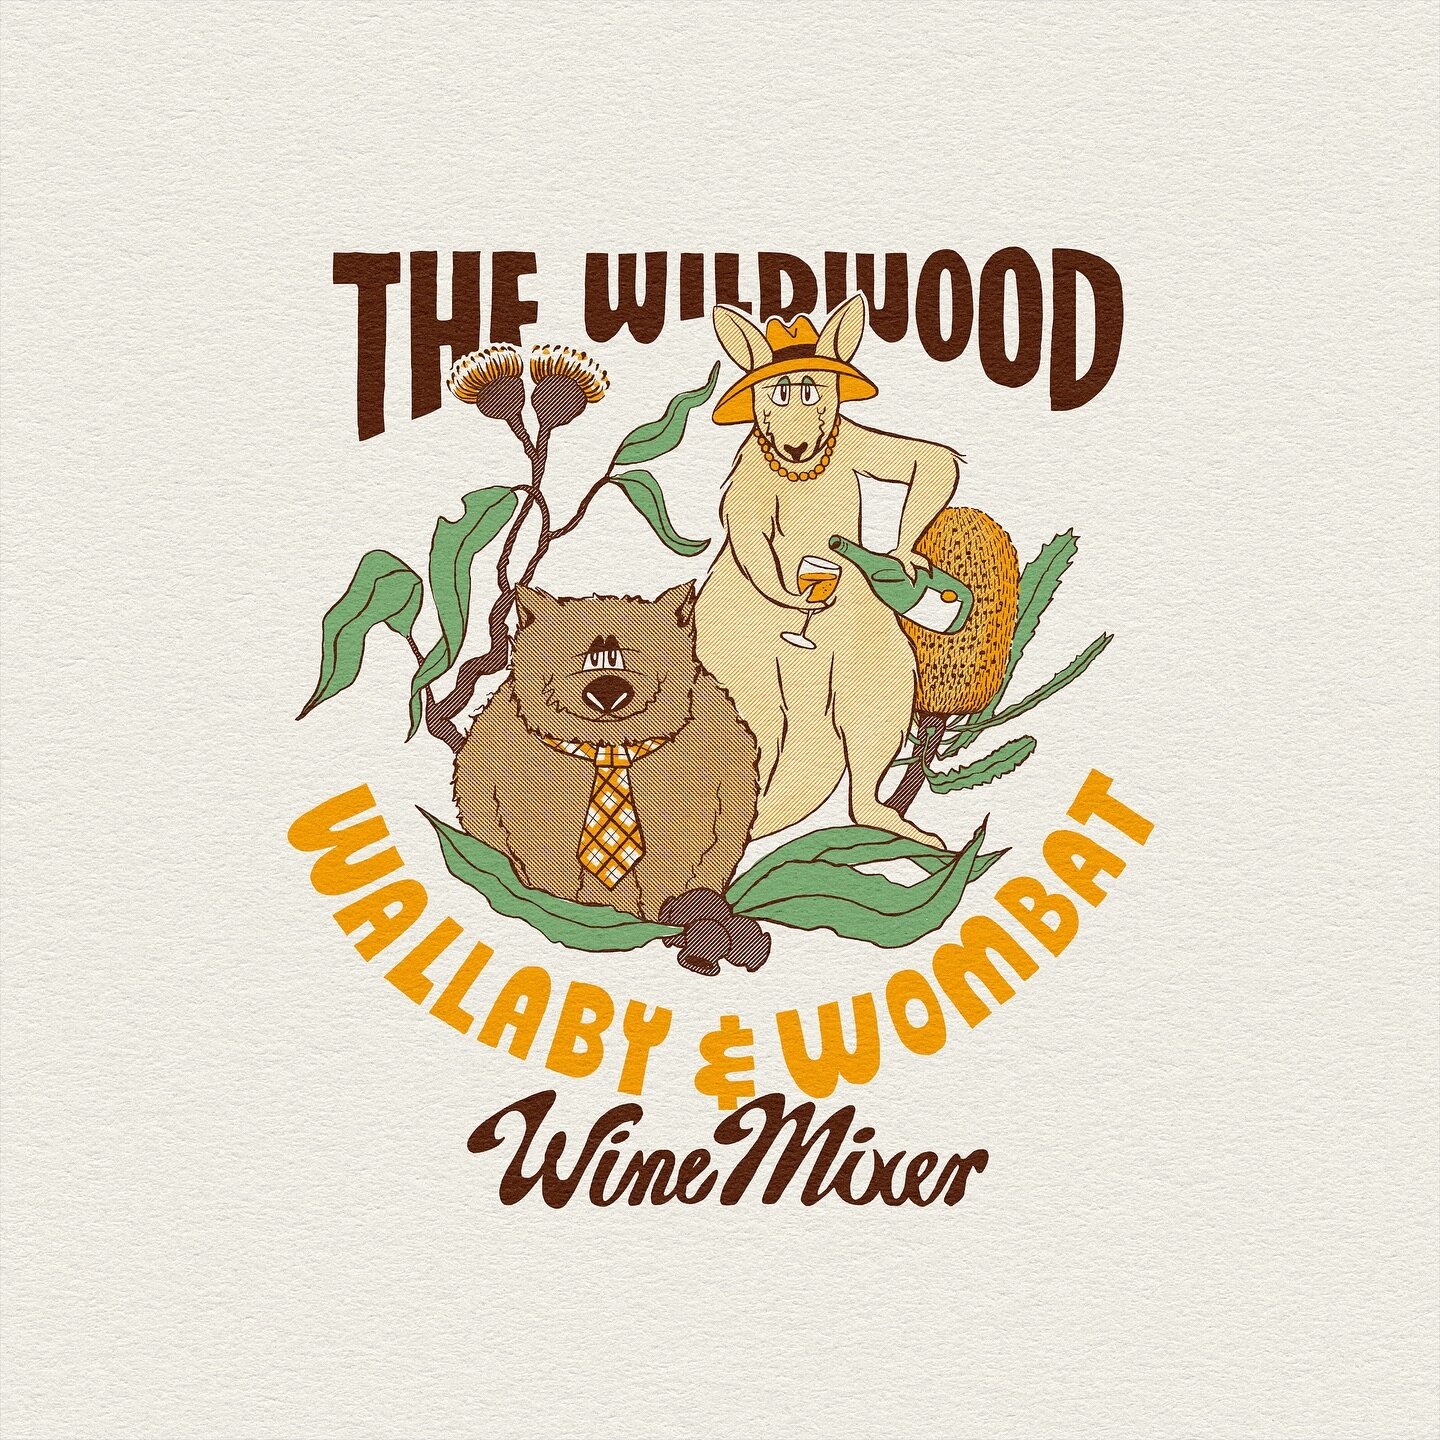 We love this design we got to create for @wildwoodkangaroovalley ! We&rsquo;ve been collecting a lot of Australiana references throughout the year so it was a great chance to flex some new shapes and textures! 🦘🌿

If you&rsquo;re in need of a uniqu